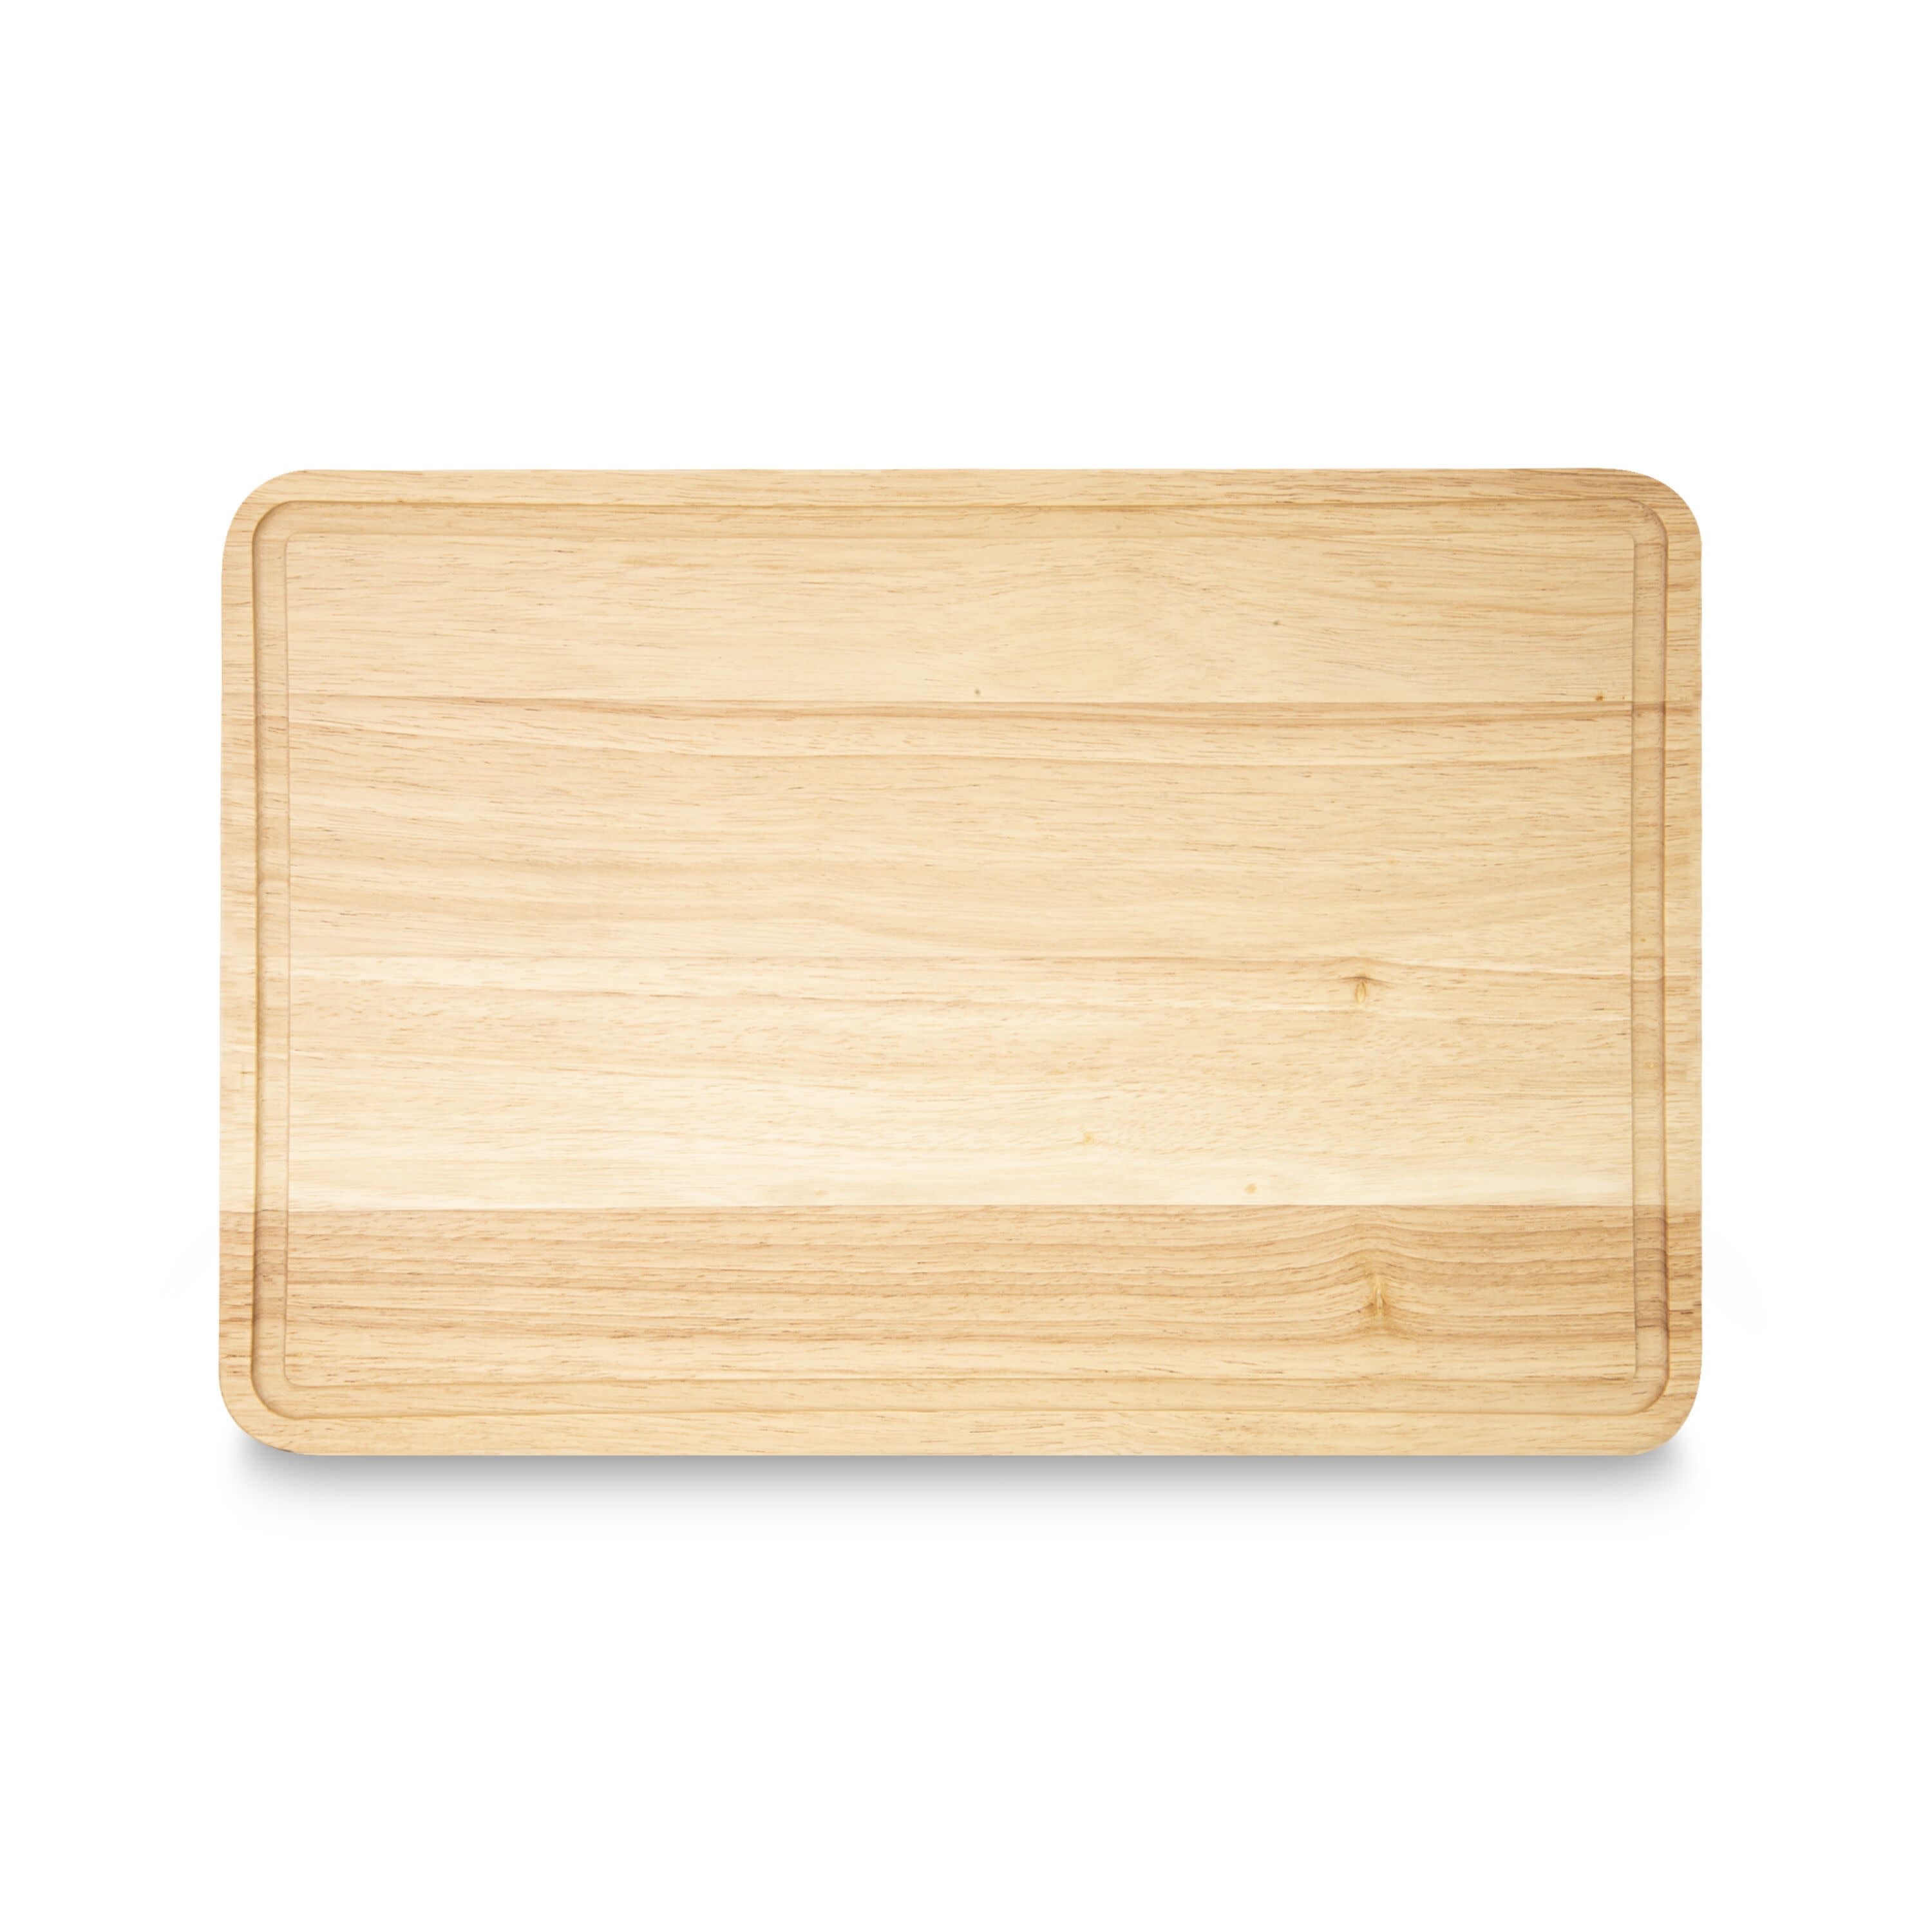 Wood Cutting Board Oak Chopping Board and Serving Tray with Juice Groove 18 x 12 Inch 